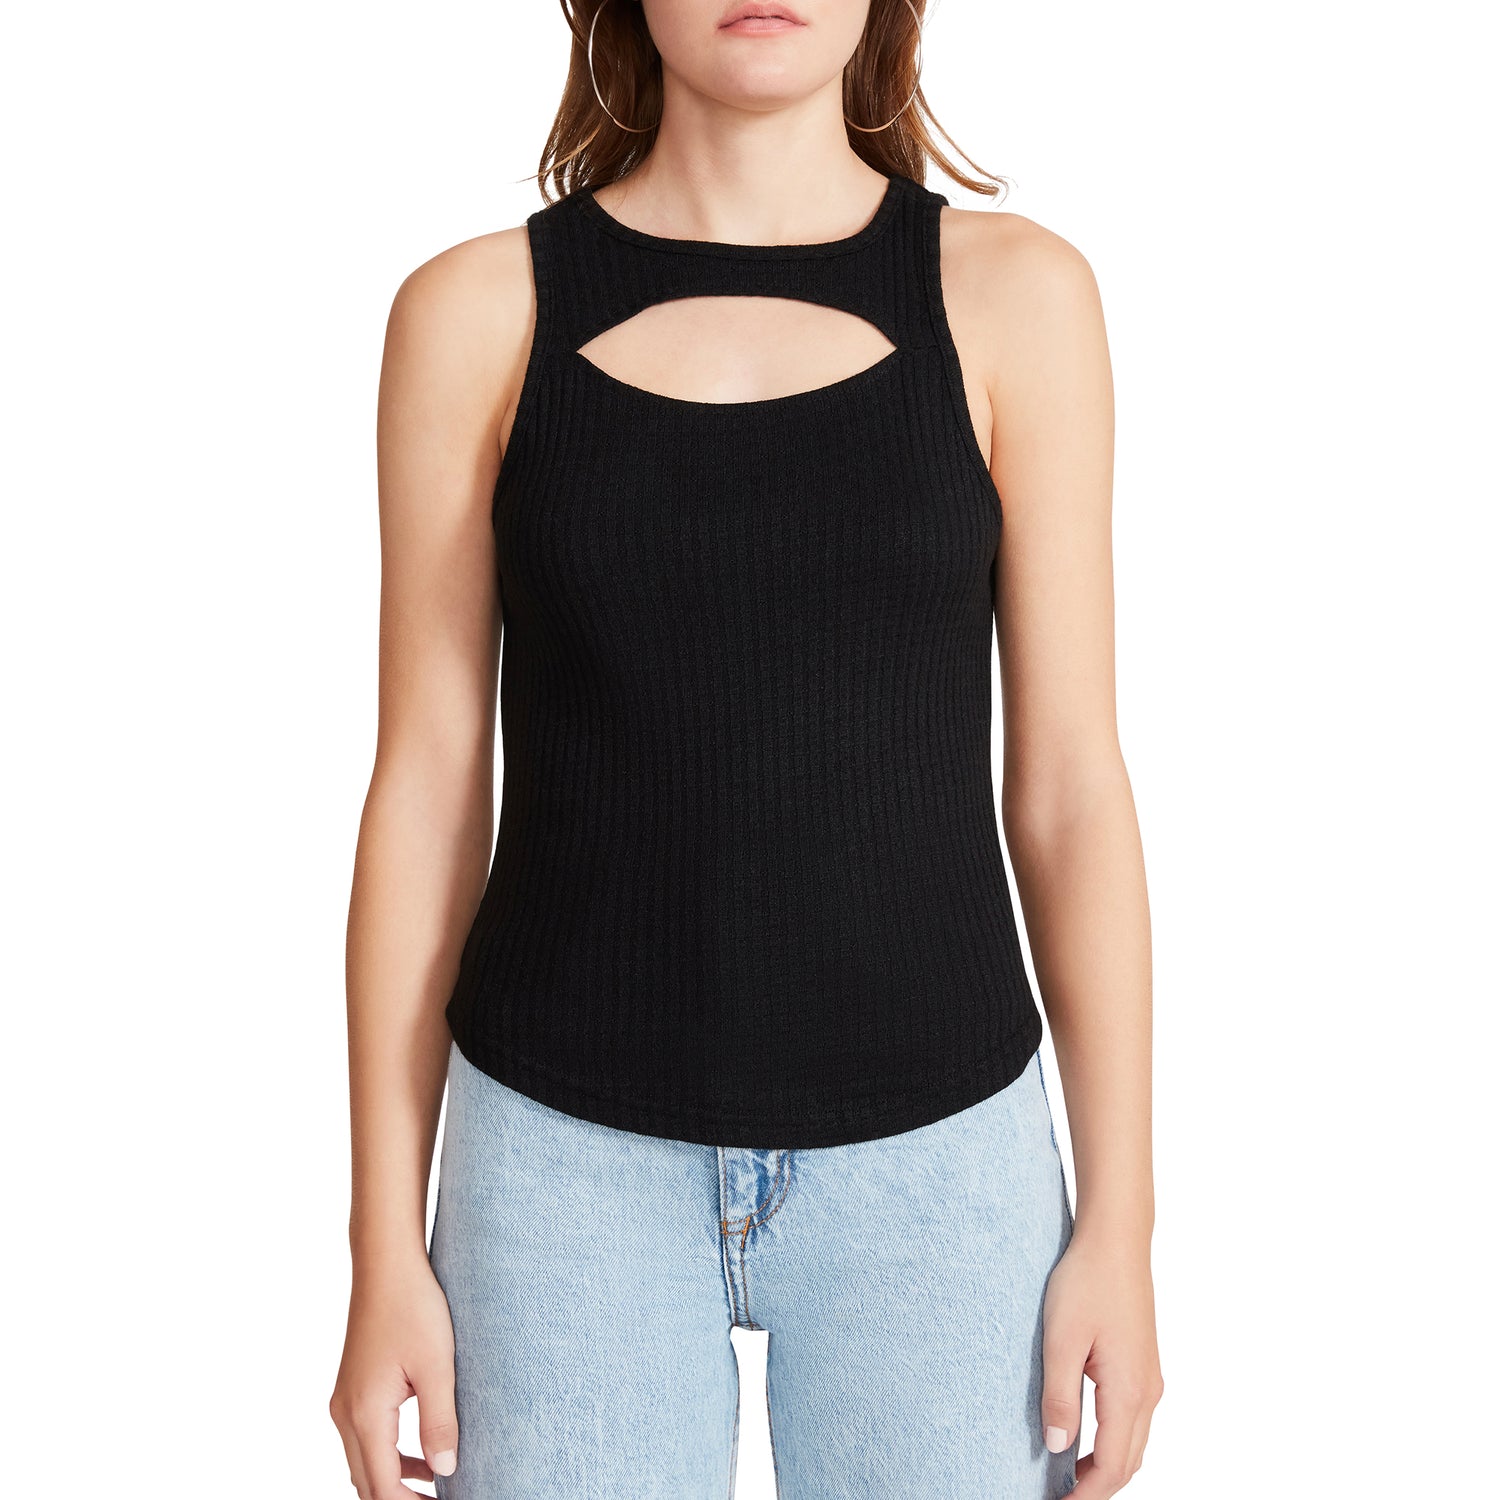 BB Dakota Sneak Peek Tank. A waffle-knit tank top featuring cute cutouts. These make this top a sweet and sassy weekend staple